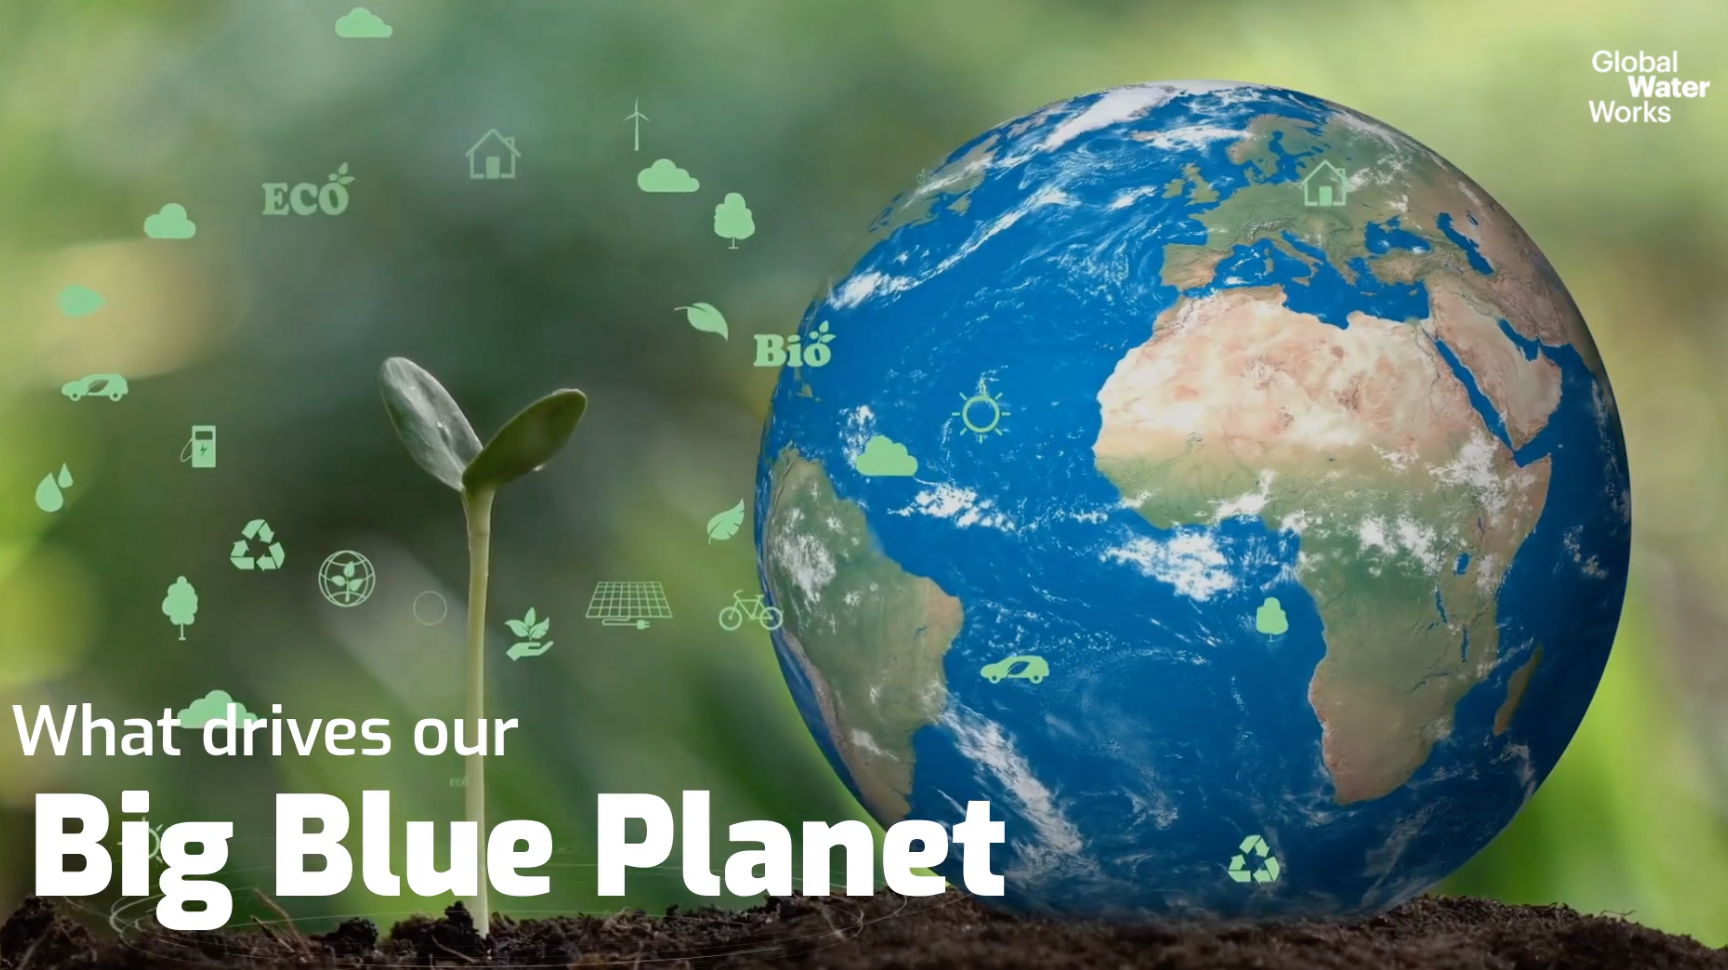 In advance of Earth Day: Discuss How Water Fuels our Big Blue Planet